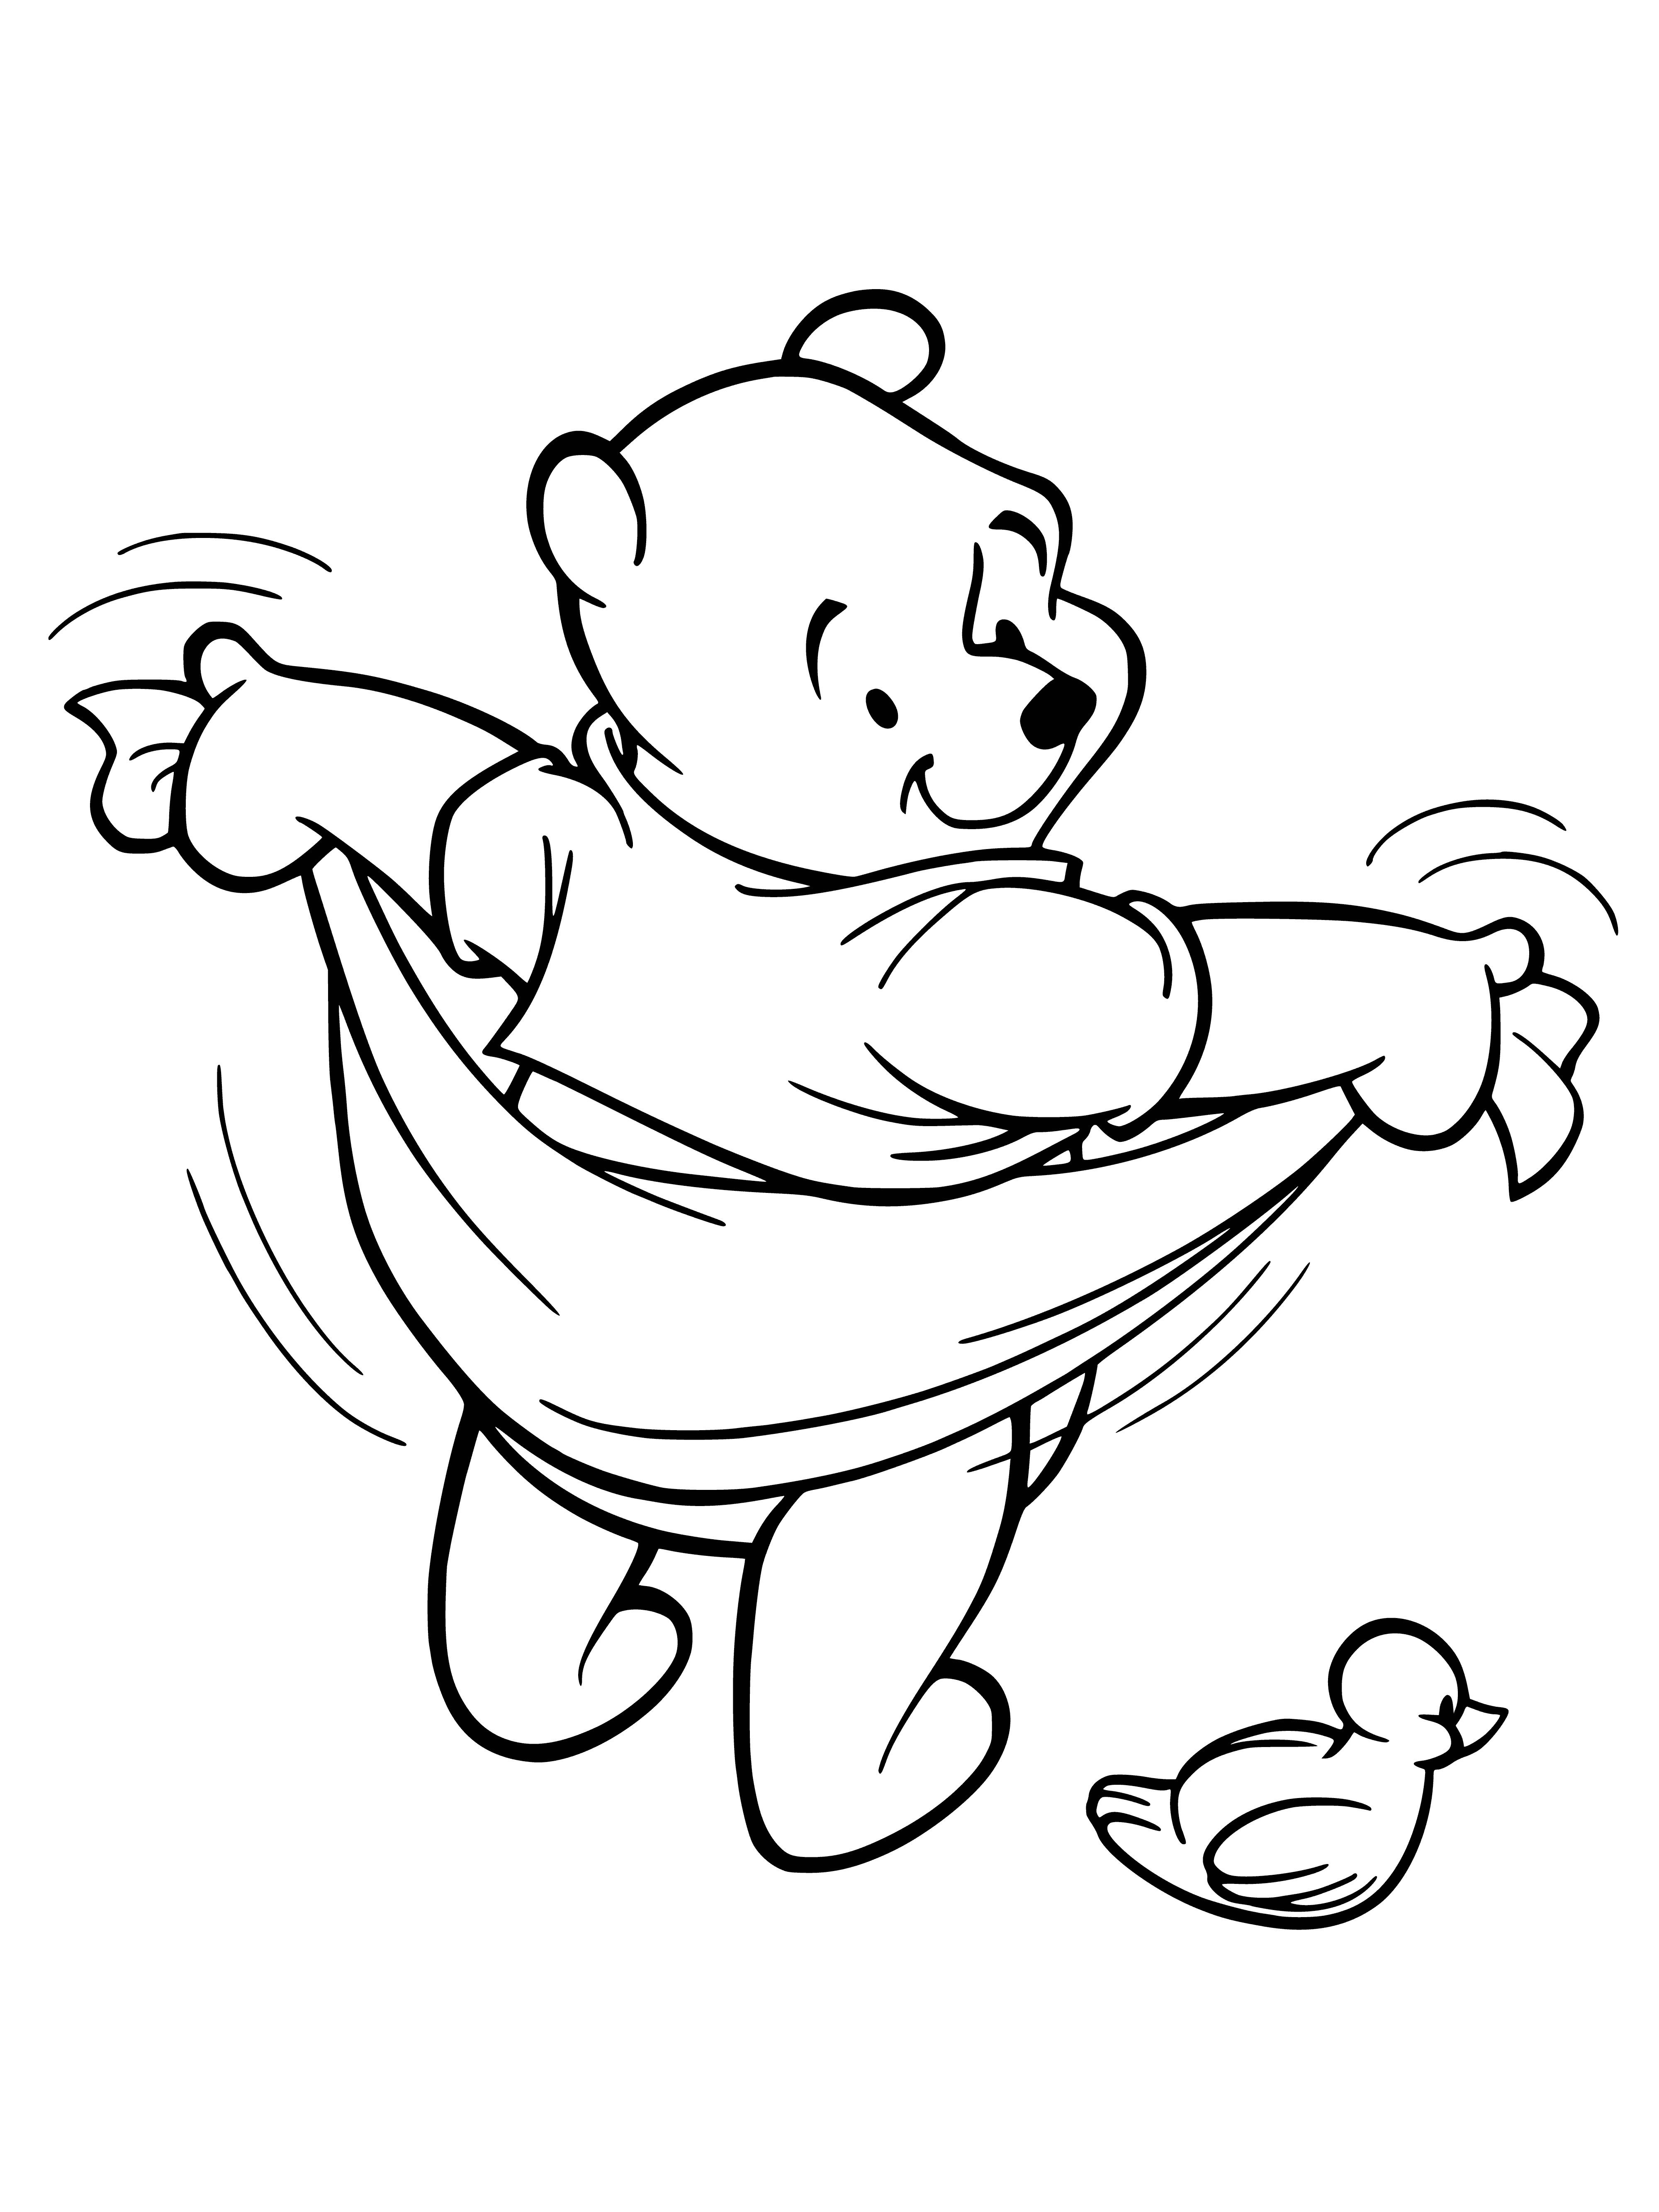 coloring page: Winnie the Pooh relaxes under a tree, smiling and surrounded by flowers.